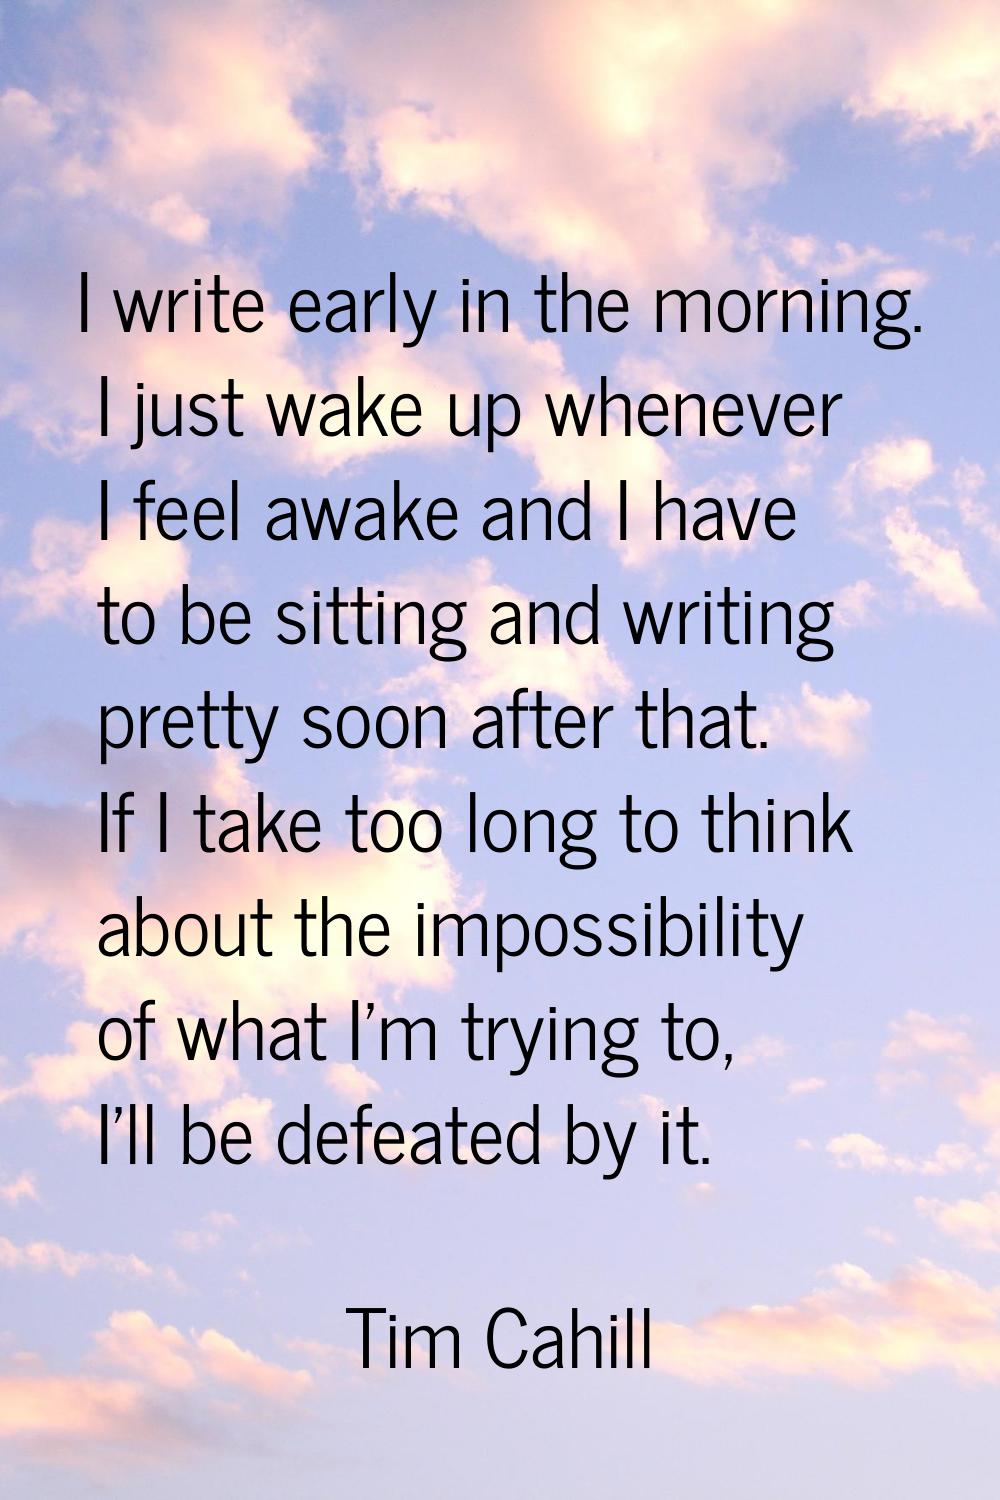 I write early in the morning. I just wake up whenever I feel awake and I have to be sitting and wri